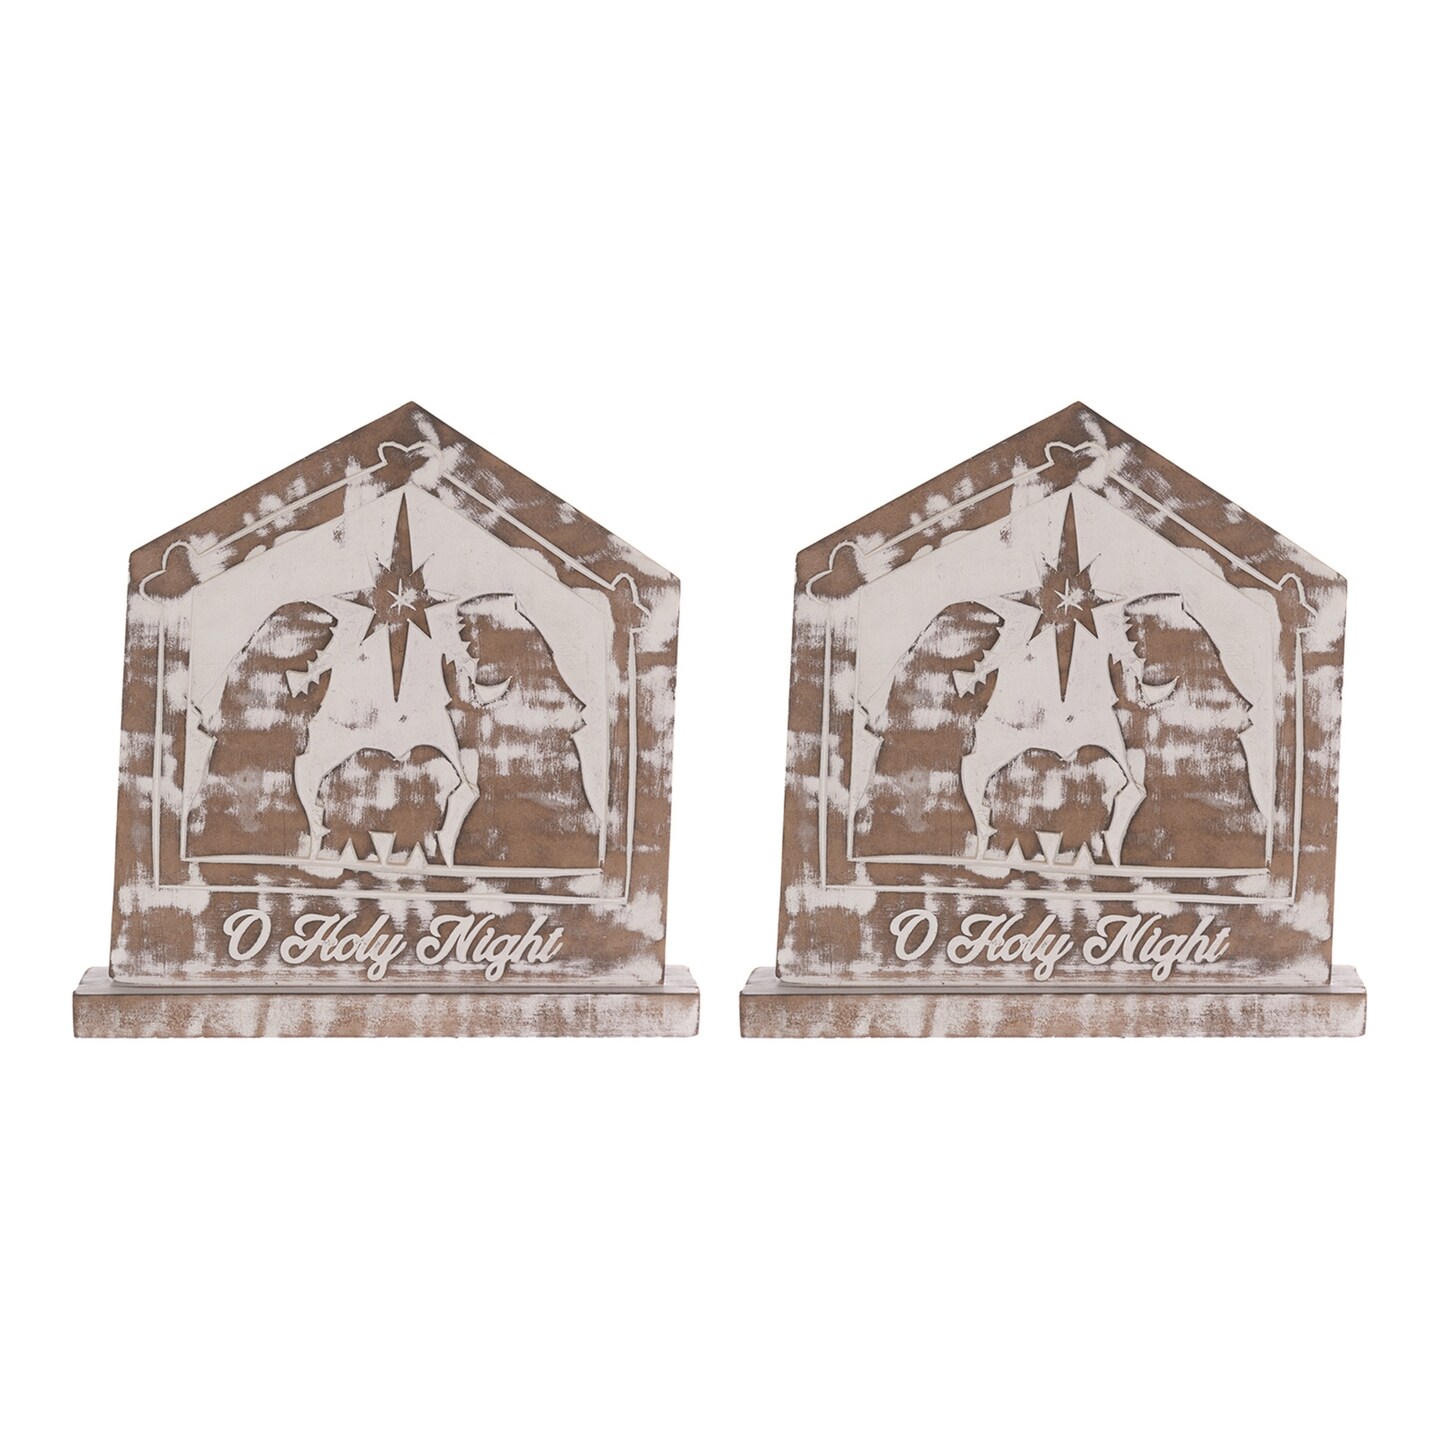 Melrose &#x22;O Holy Night&#x22; Nativity Sign Christmas Tabletop Decorations - 9.25&#x22; - Set of 2